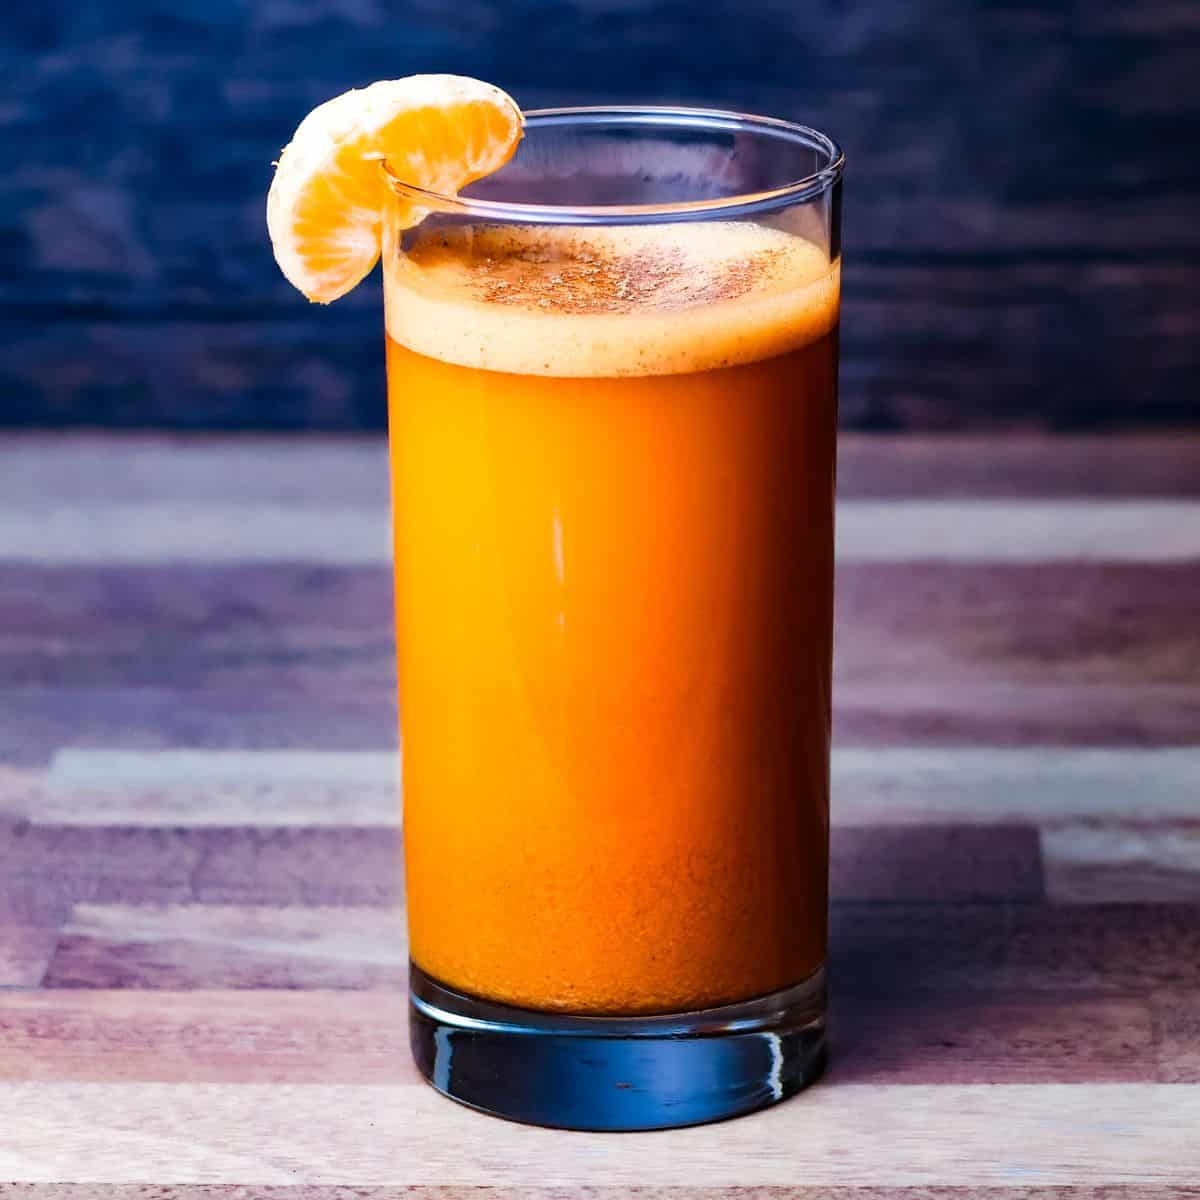 A refreshing glass of sweet potato juice adorned with a small orange slice on the rim, served.